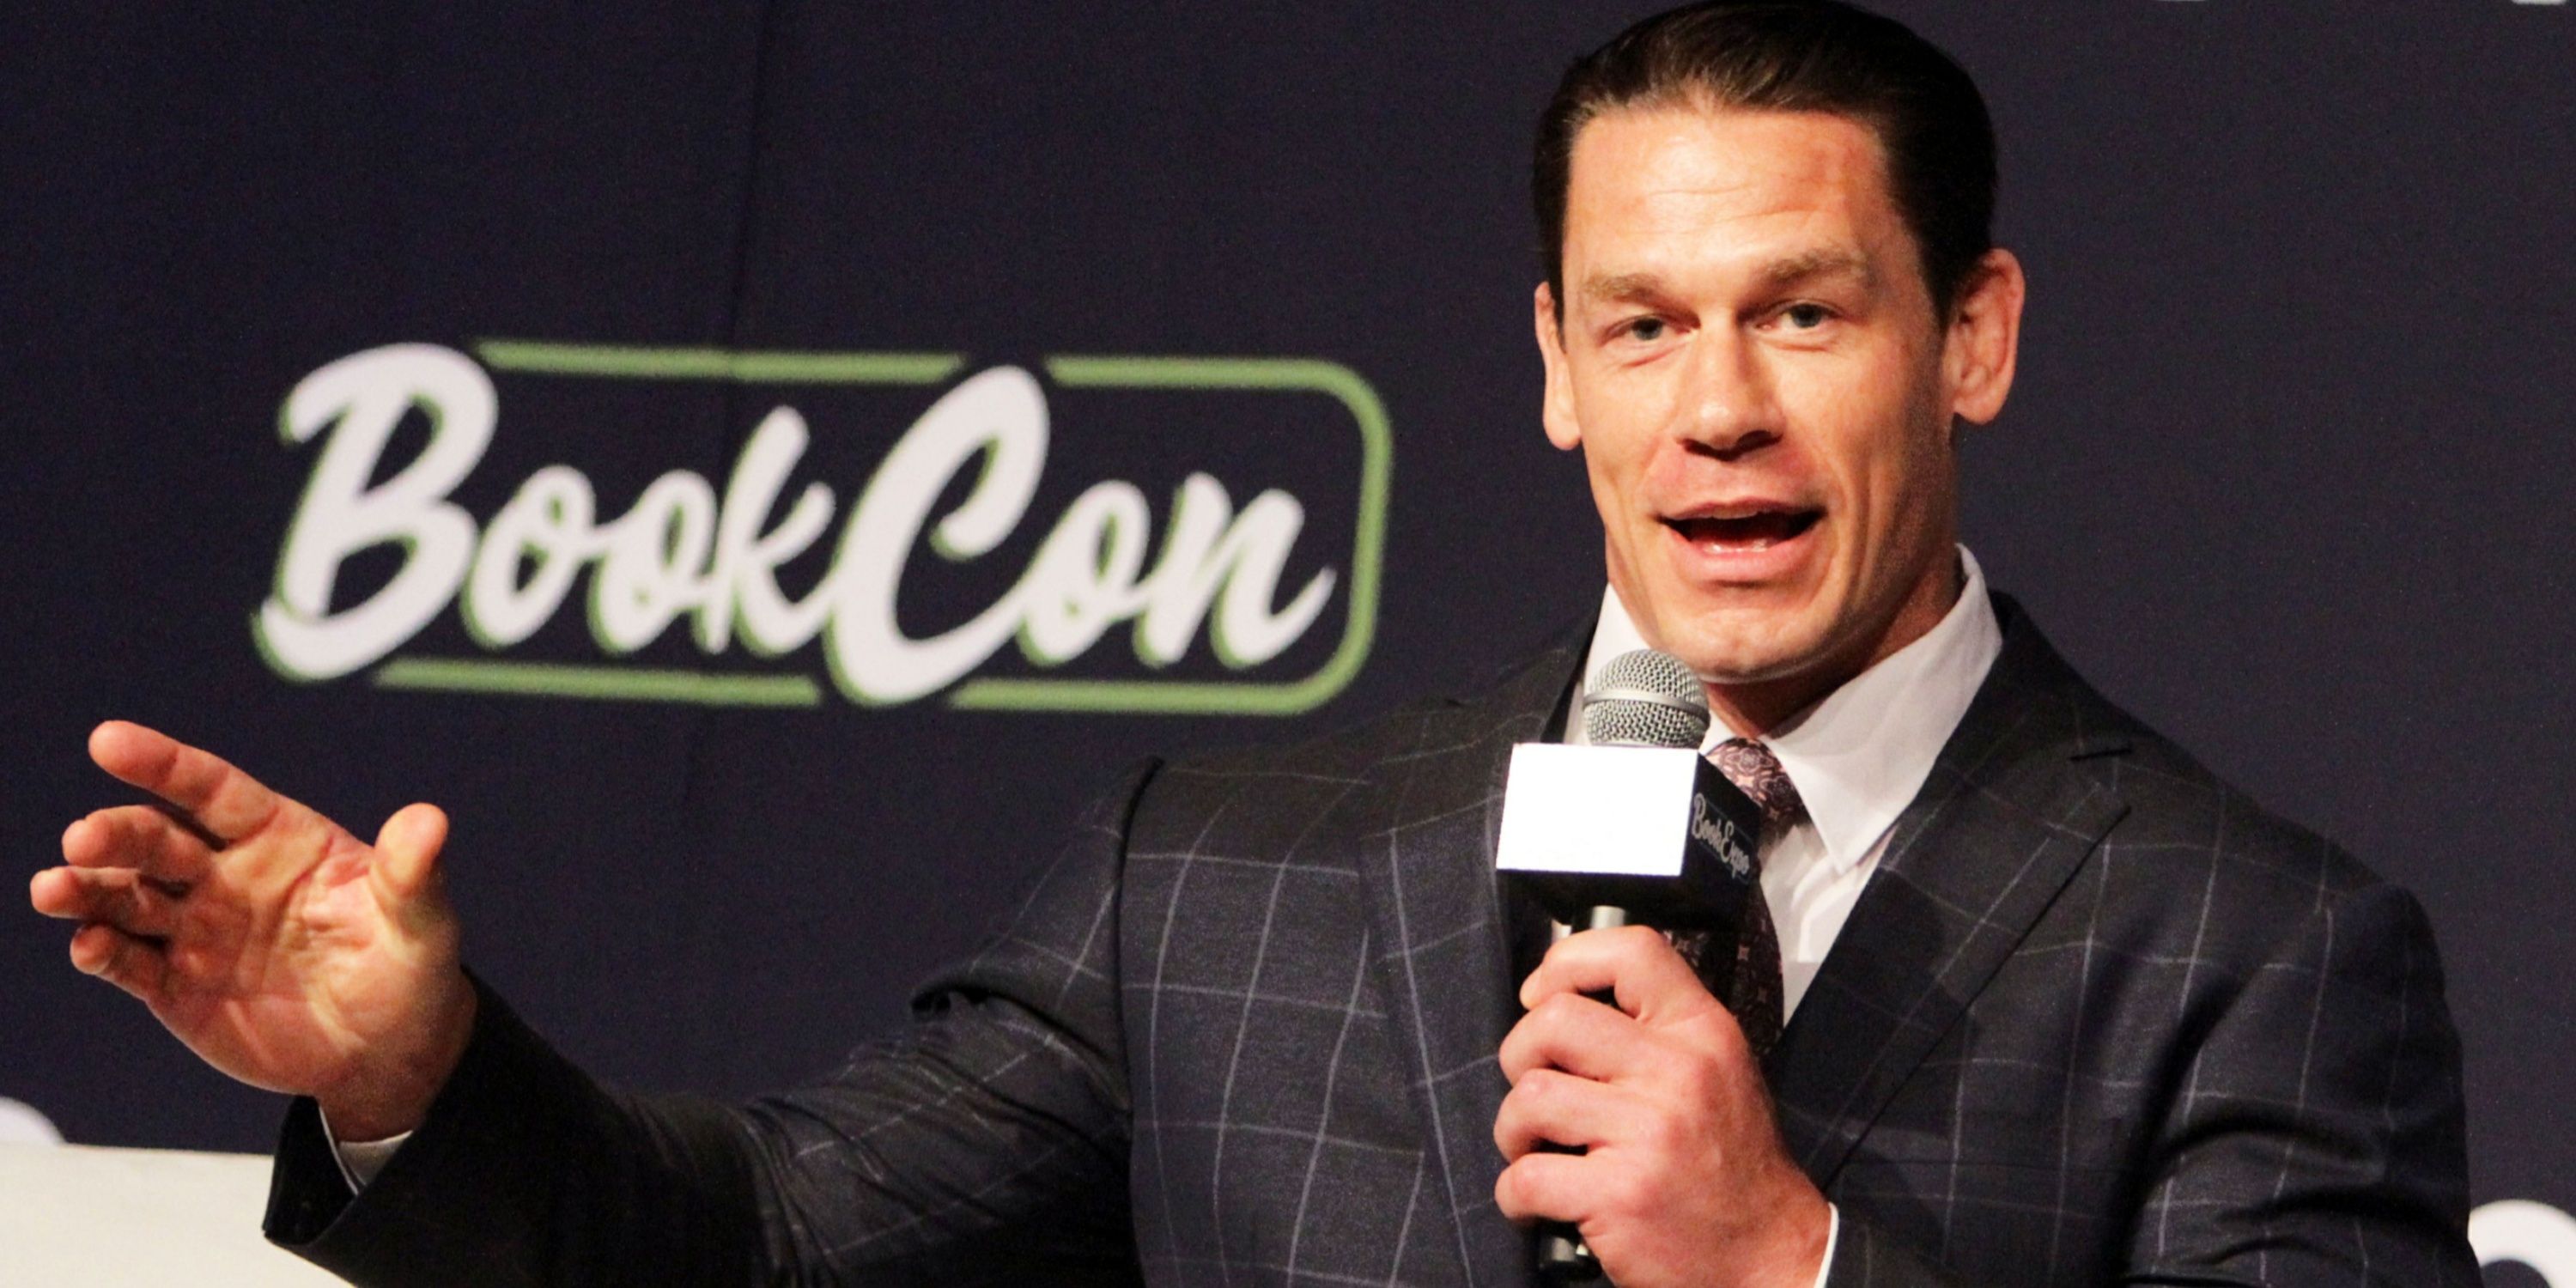 John Cena answers questions at an event 